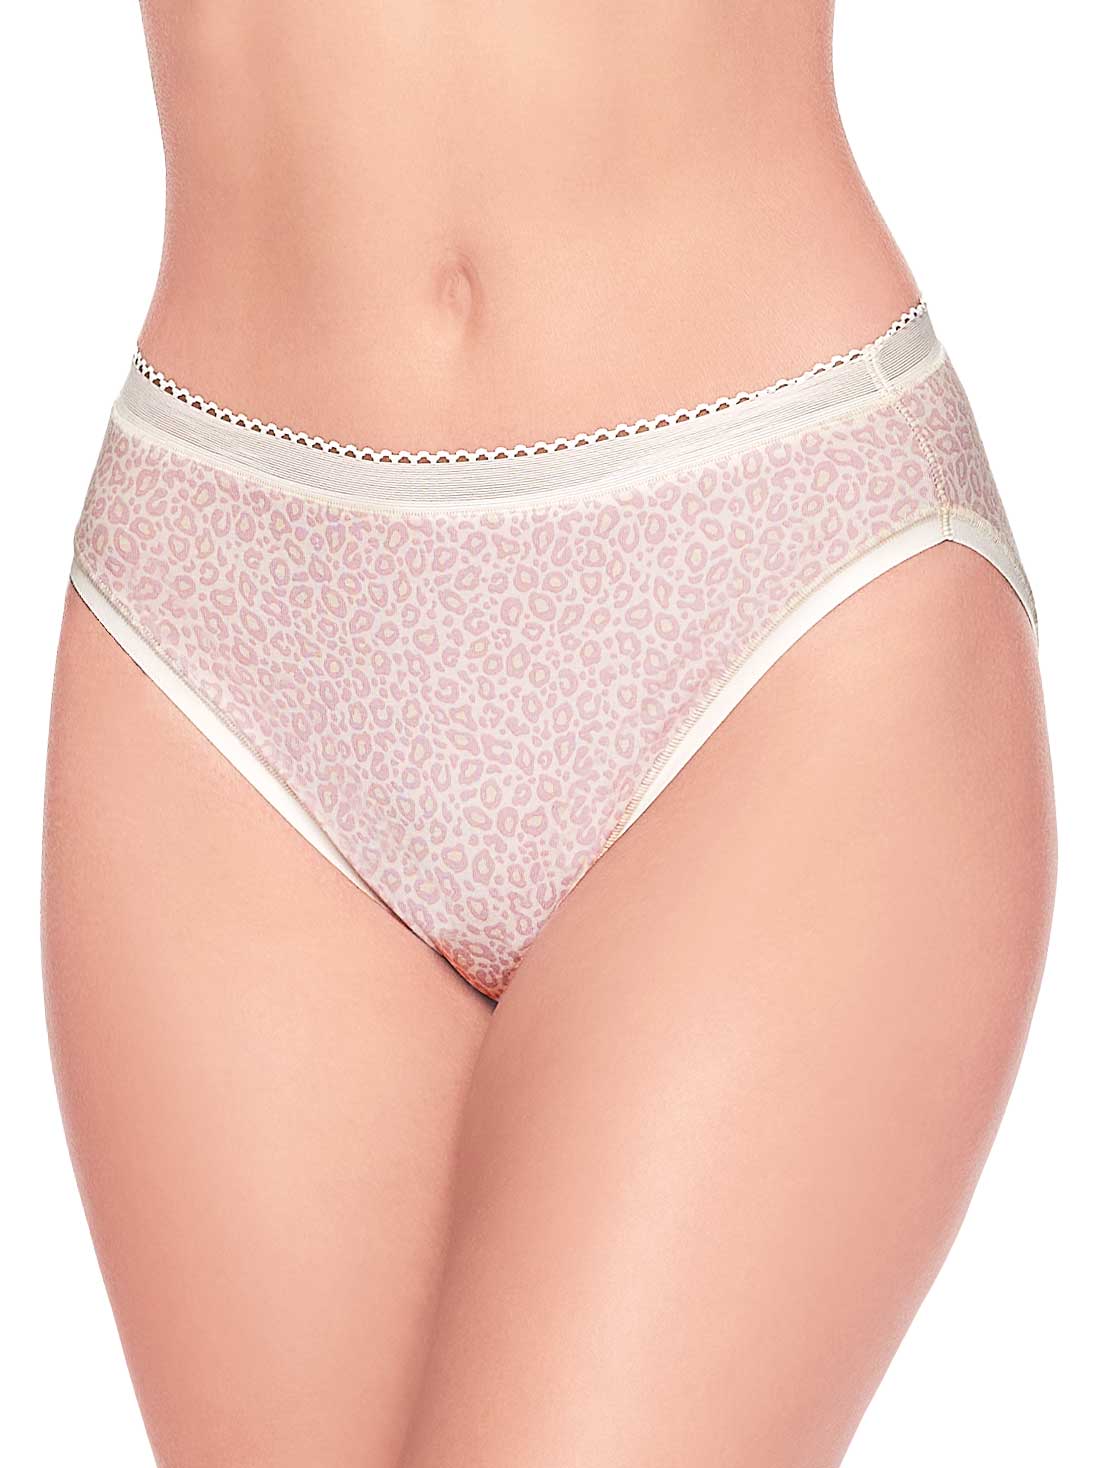 French Cut Panties 79001 - Pack of 6